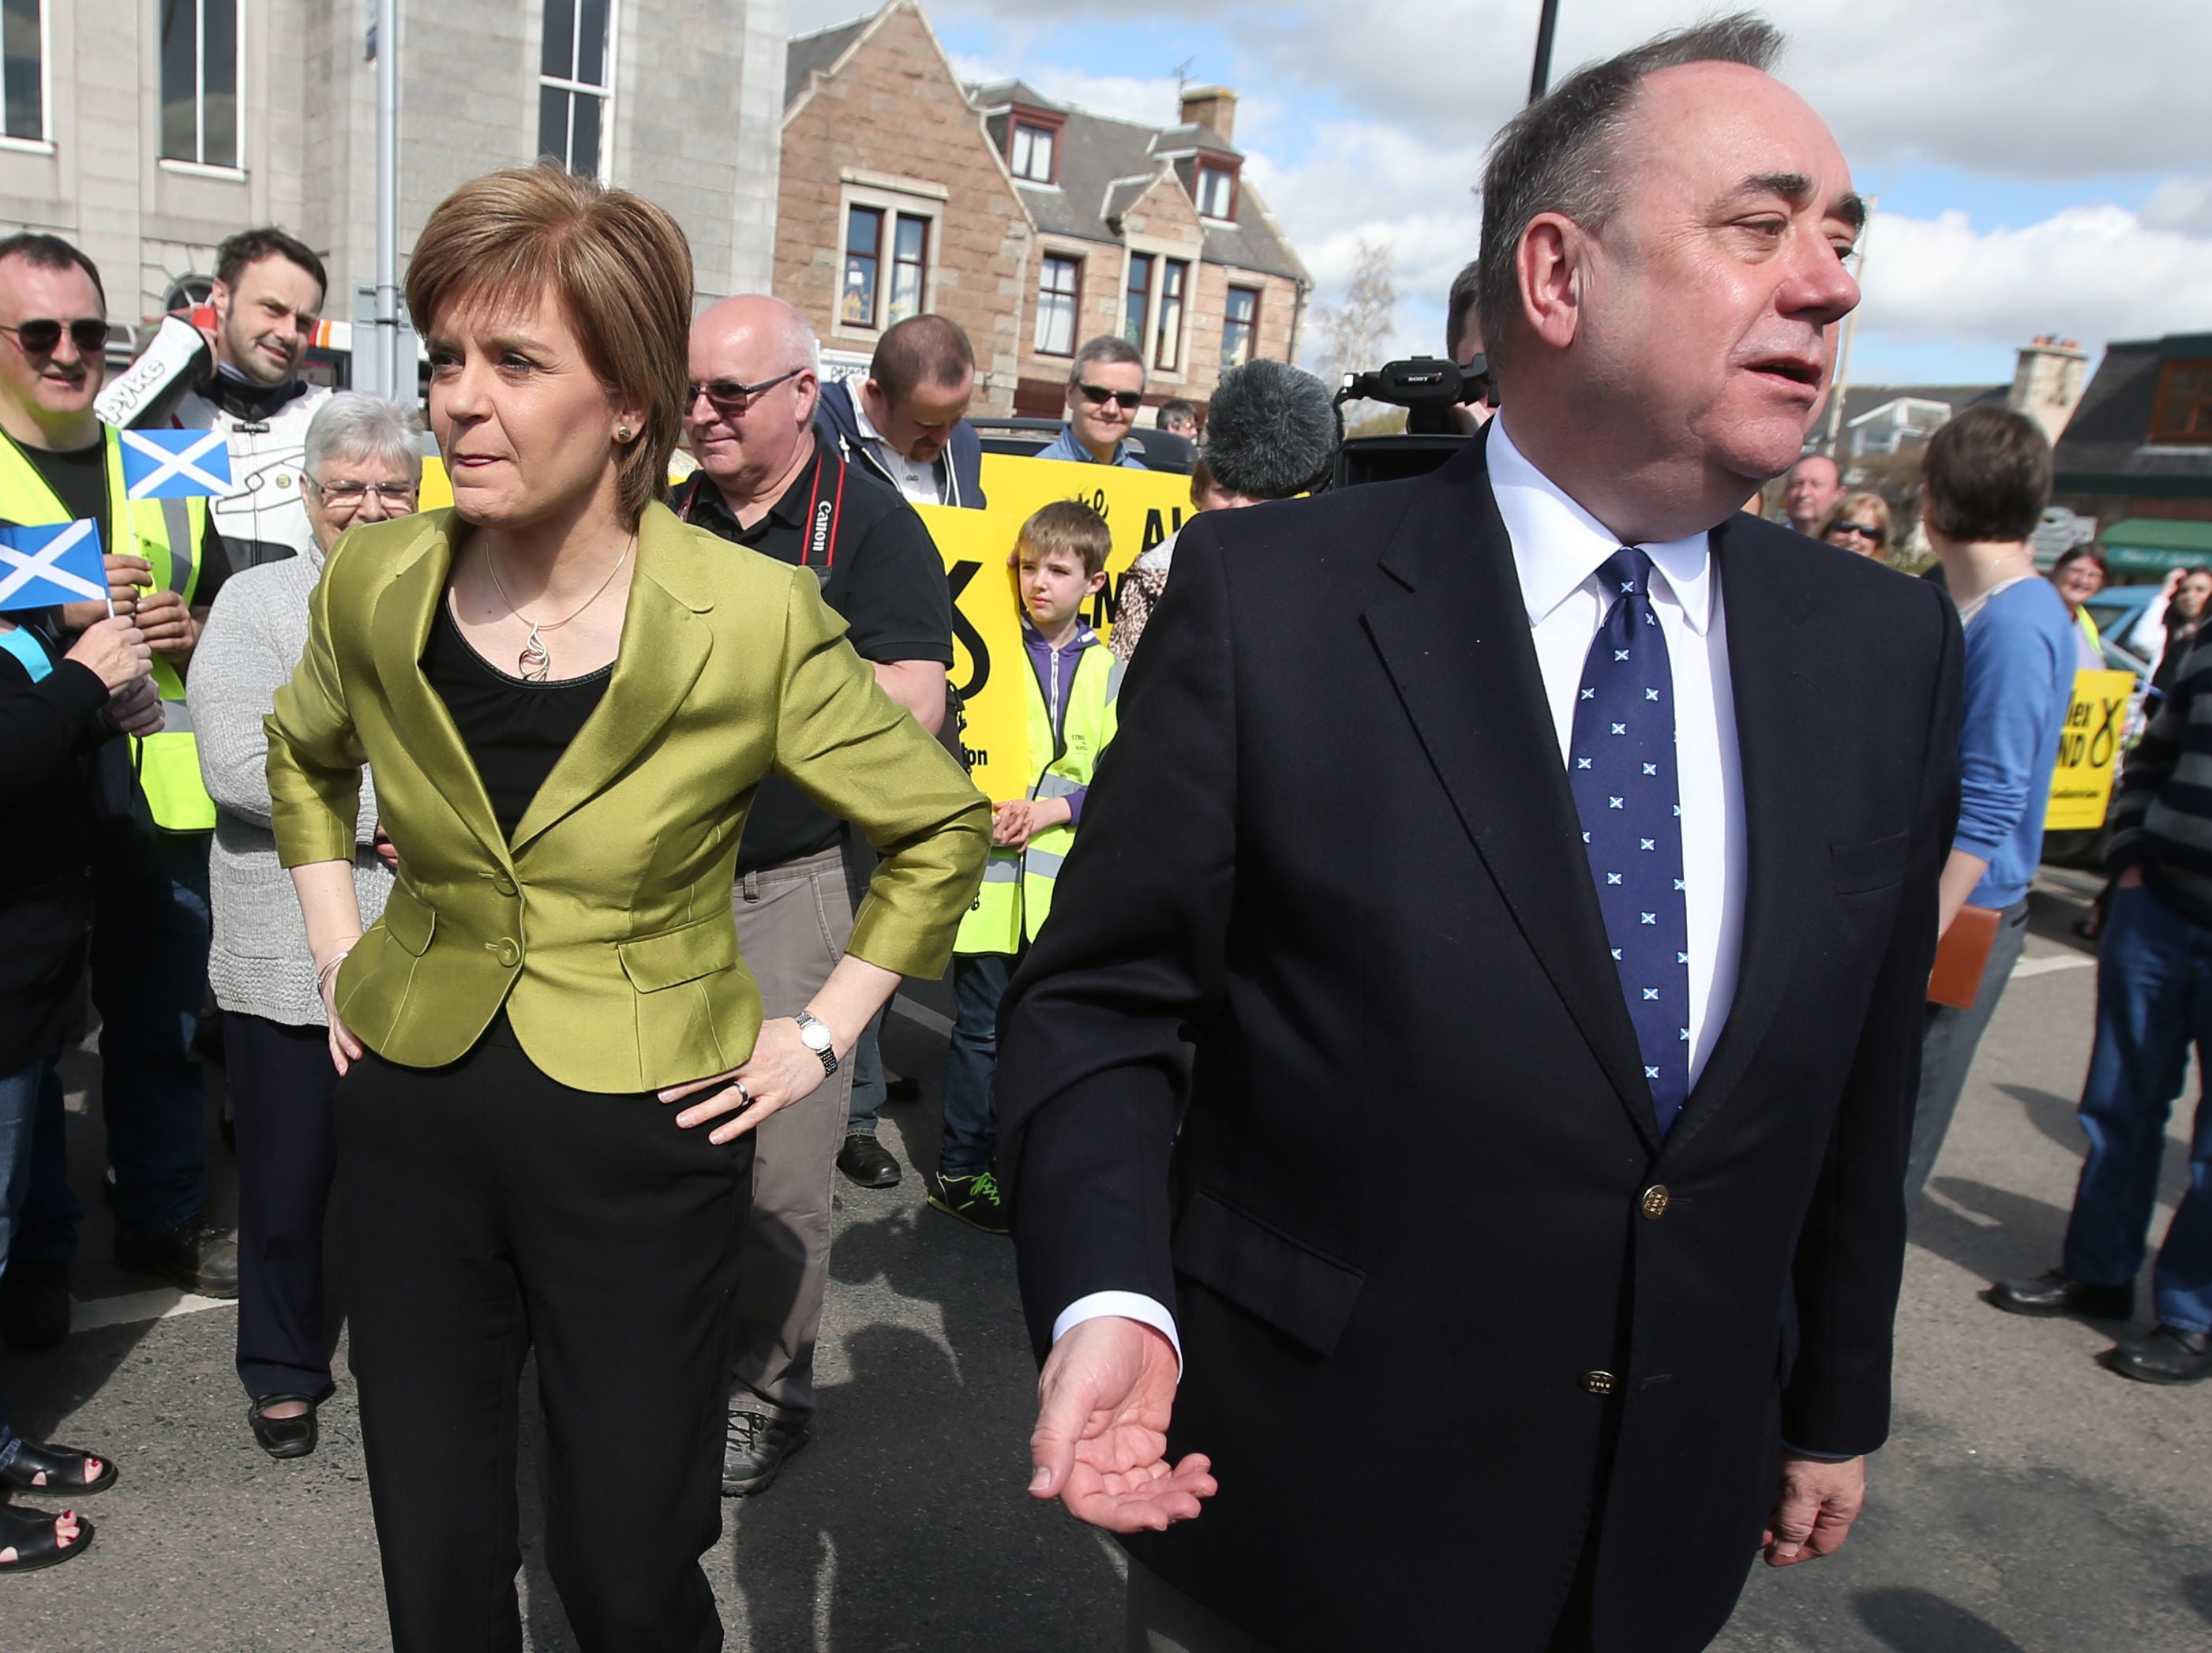 Nicola Sturgeon with Alex Salmond on the campaign trail in Inverurie in 2015